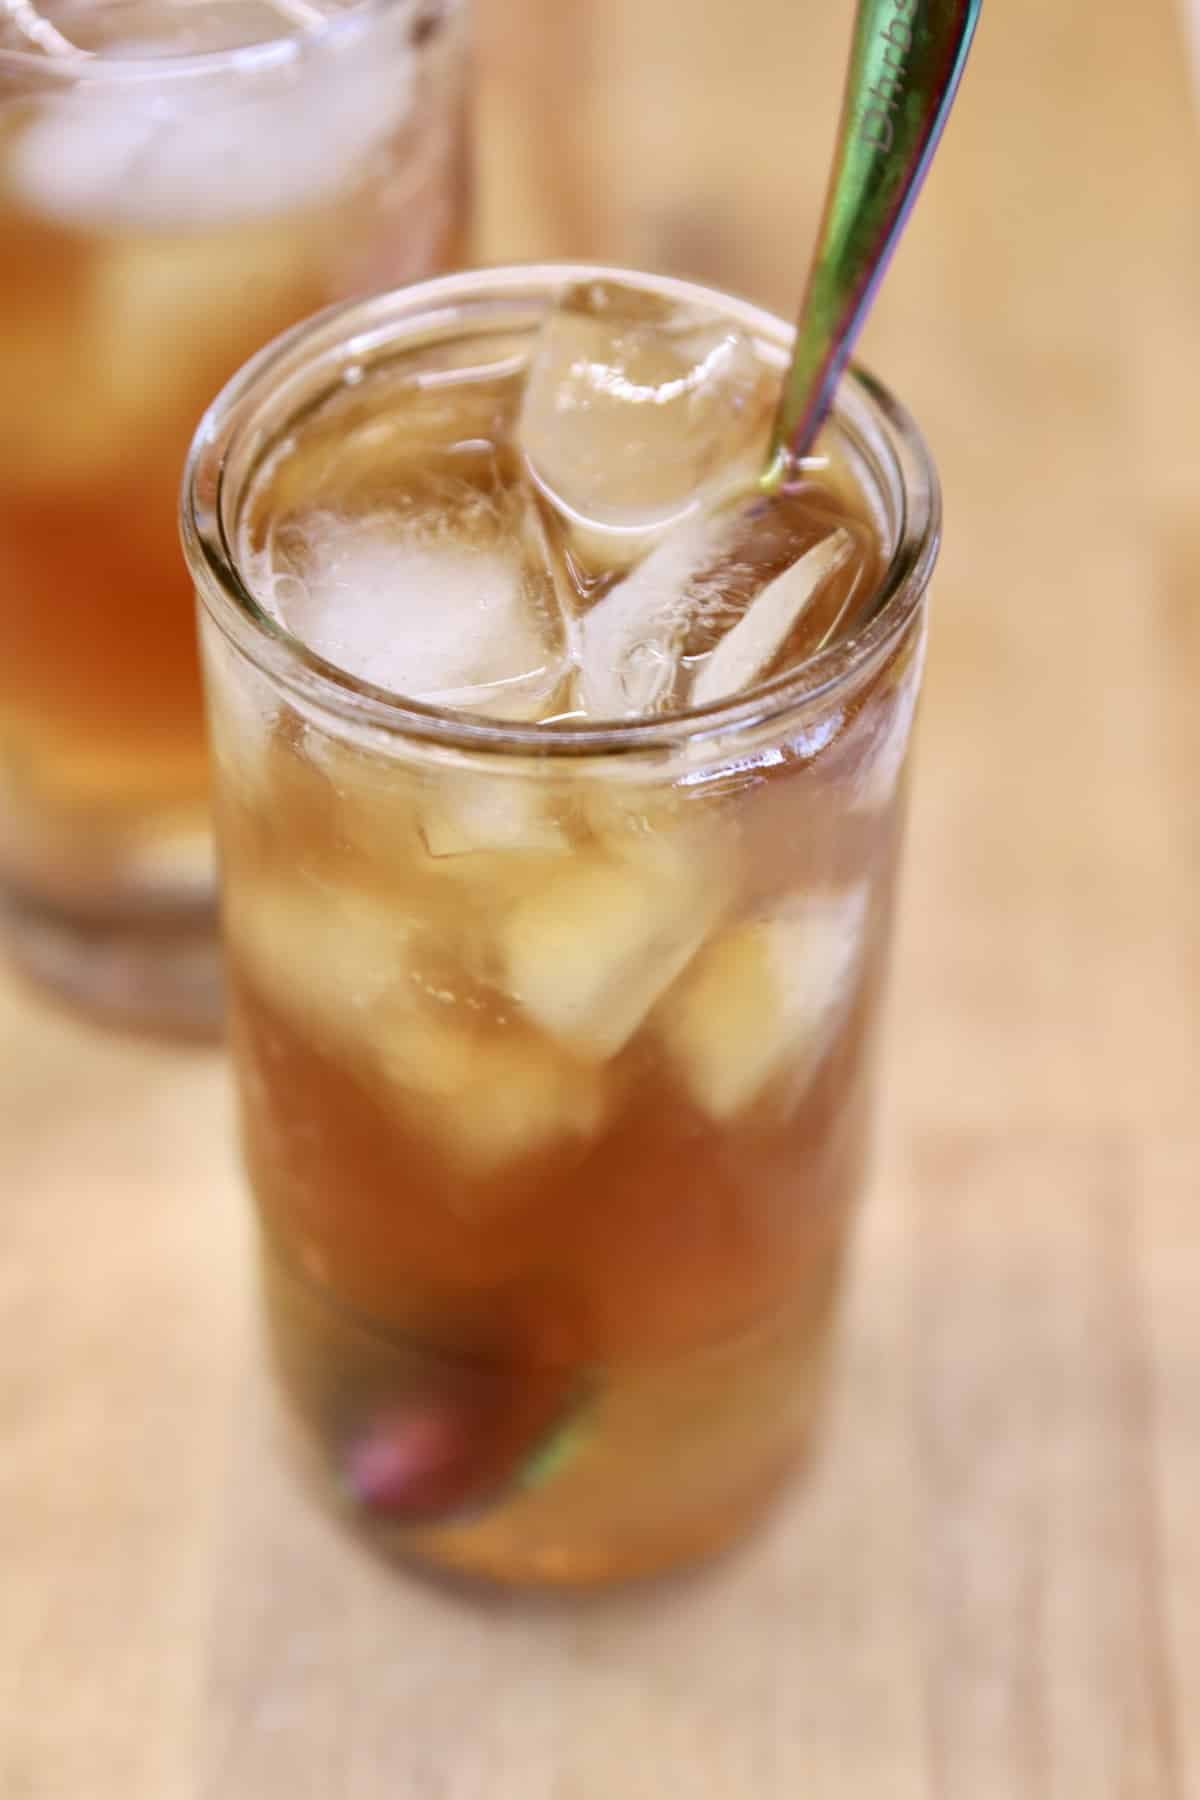 Iced tea in a glass with a spoon.